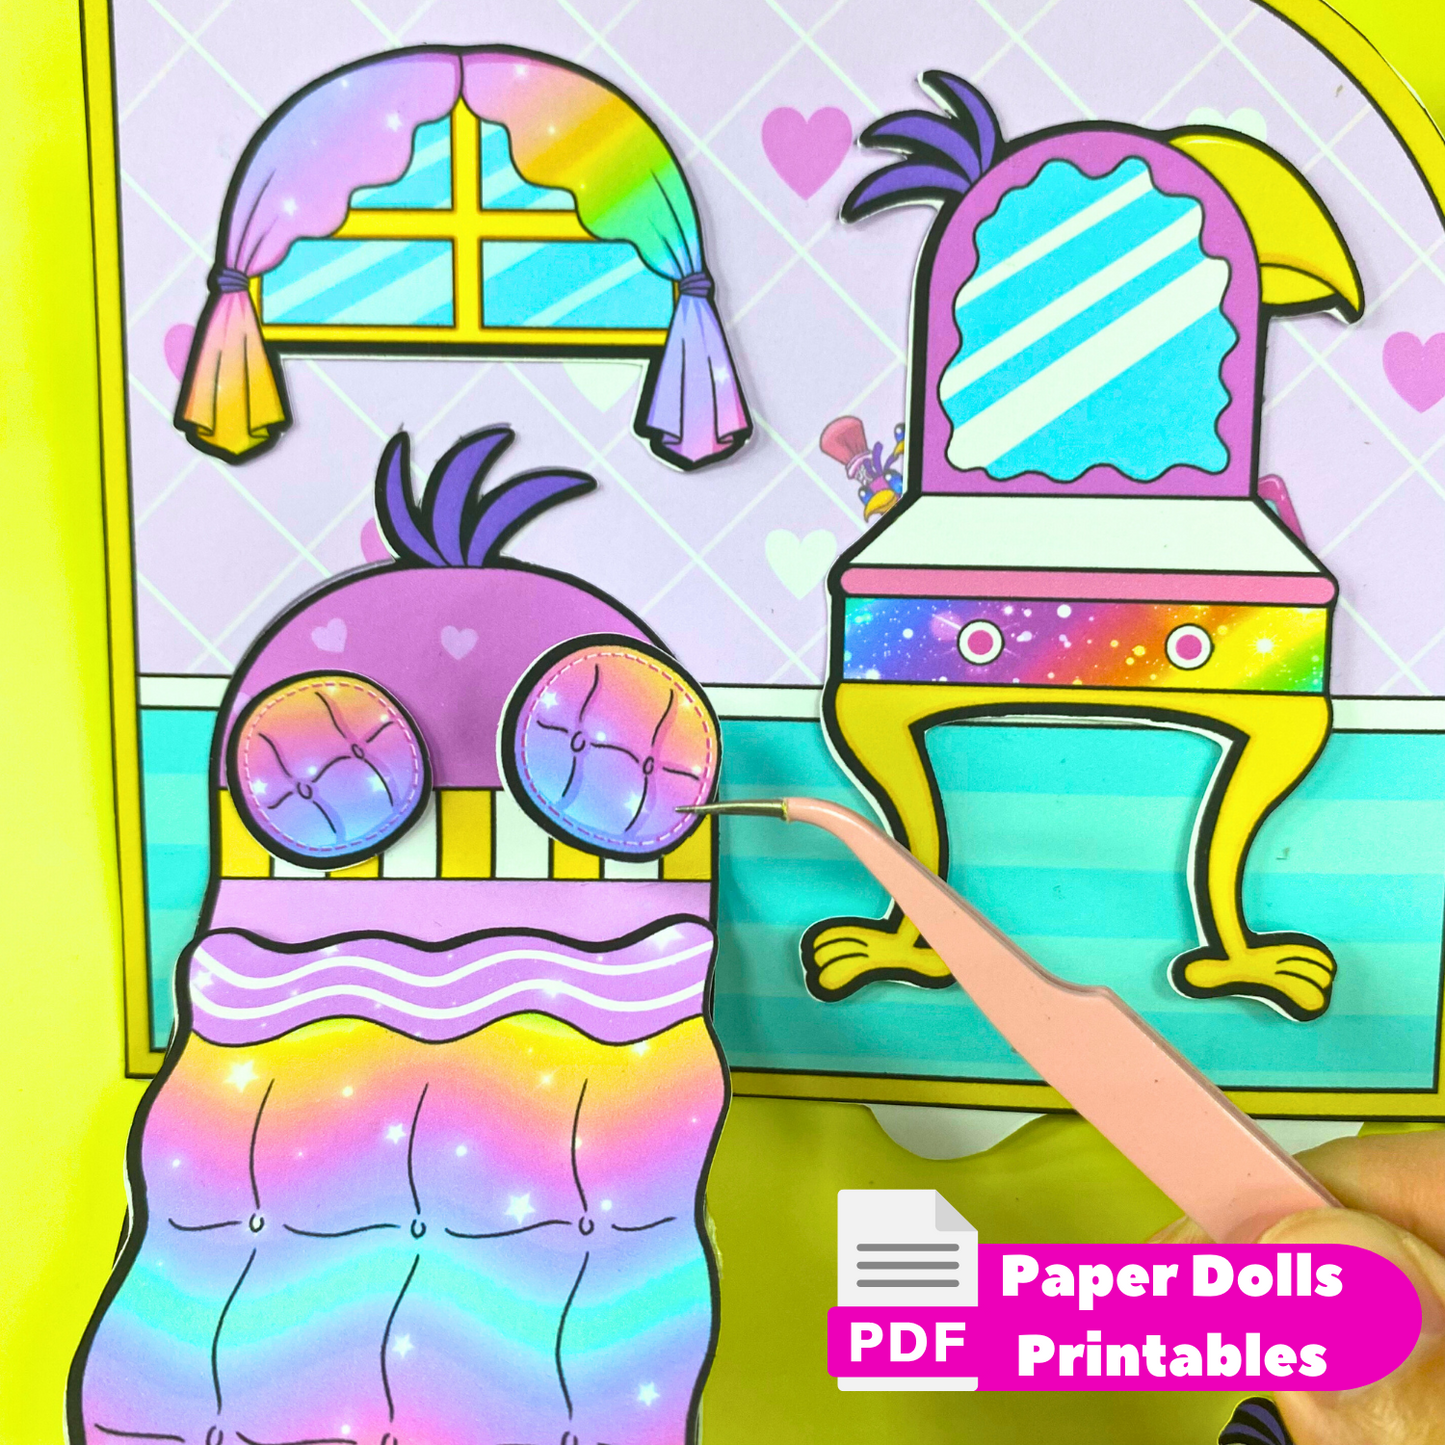 Rainbow Parrot Barbie Camper Truck Printable | Girls Activity Book | Camper Printable | Paper Crafts for Kids | Paper Doll House 🌈 Woa Doll Crafts